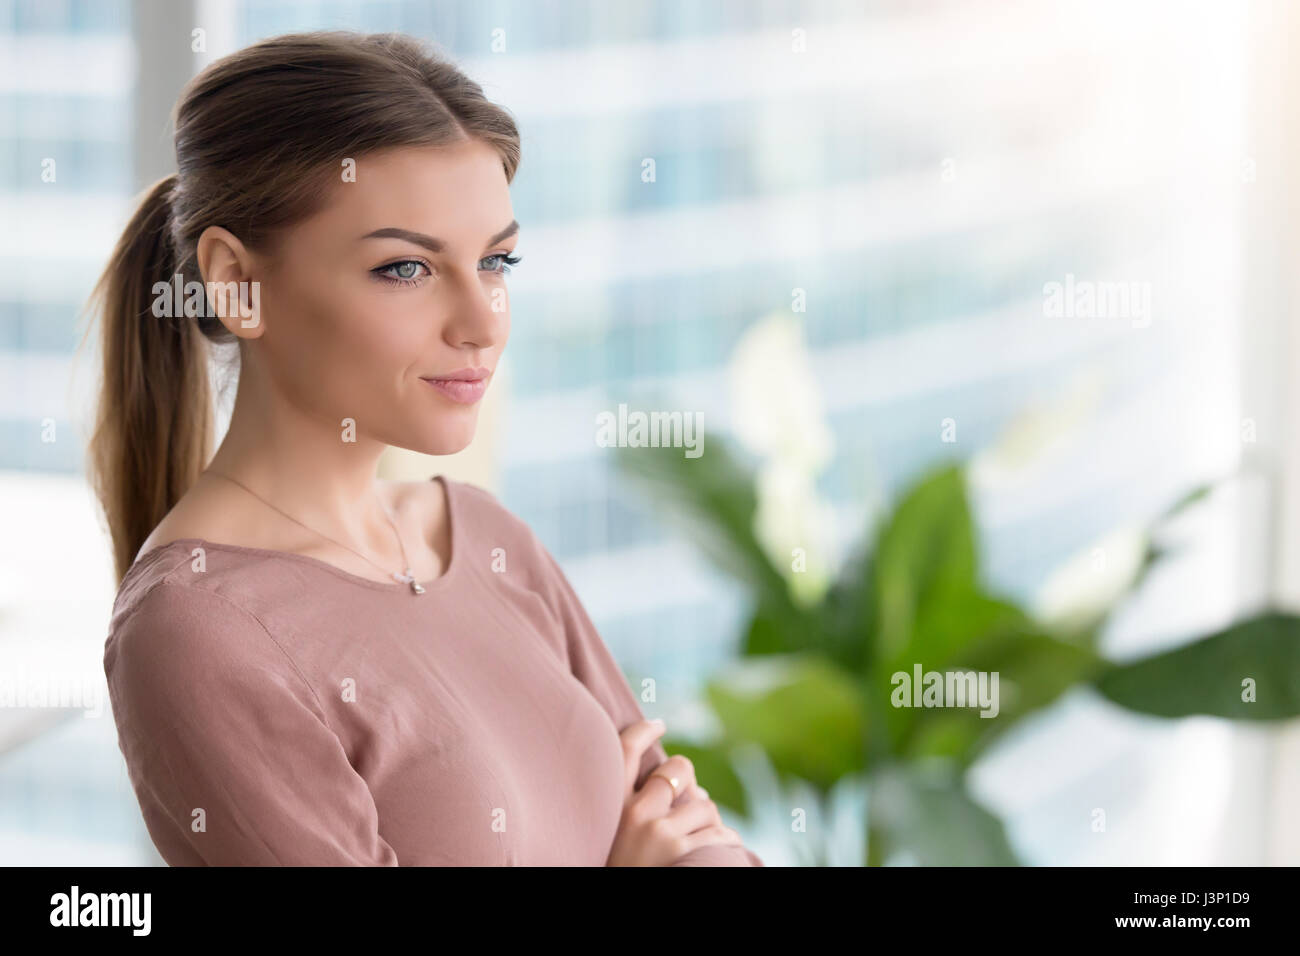 Pensive young woman looking through window, bras cros Banque D'Images